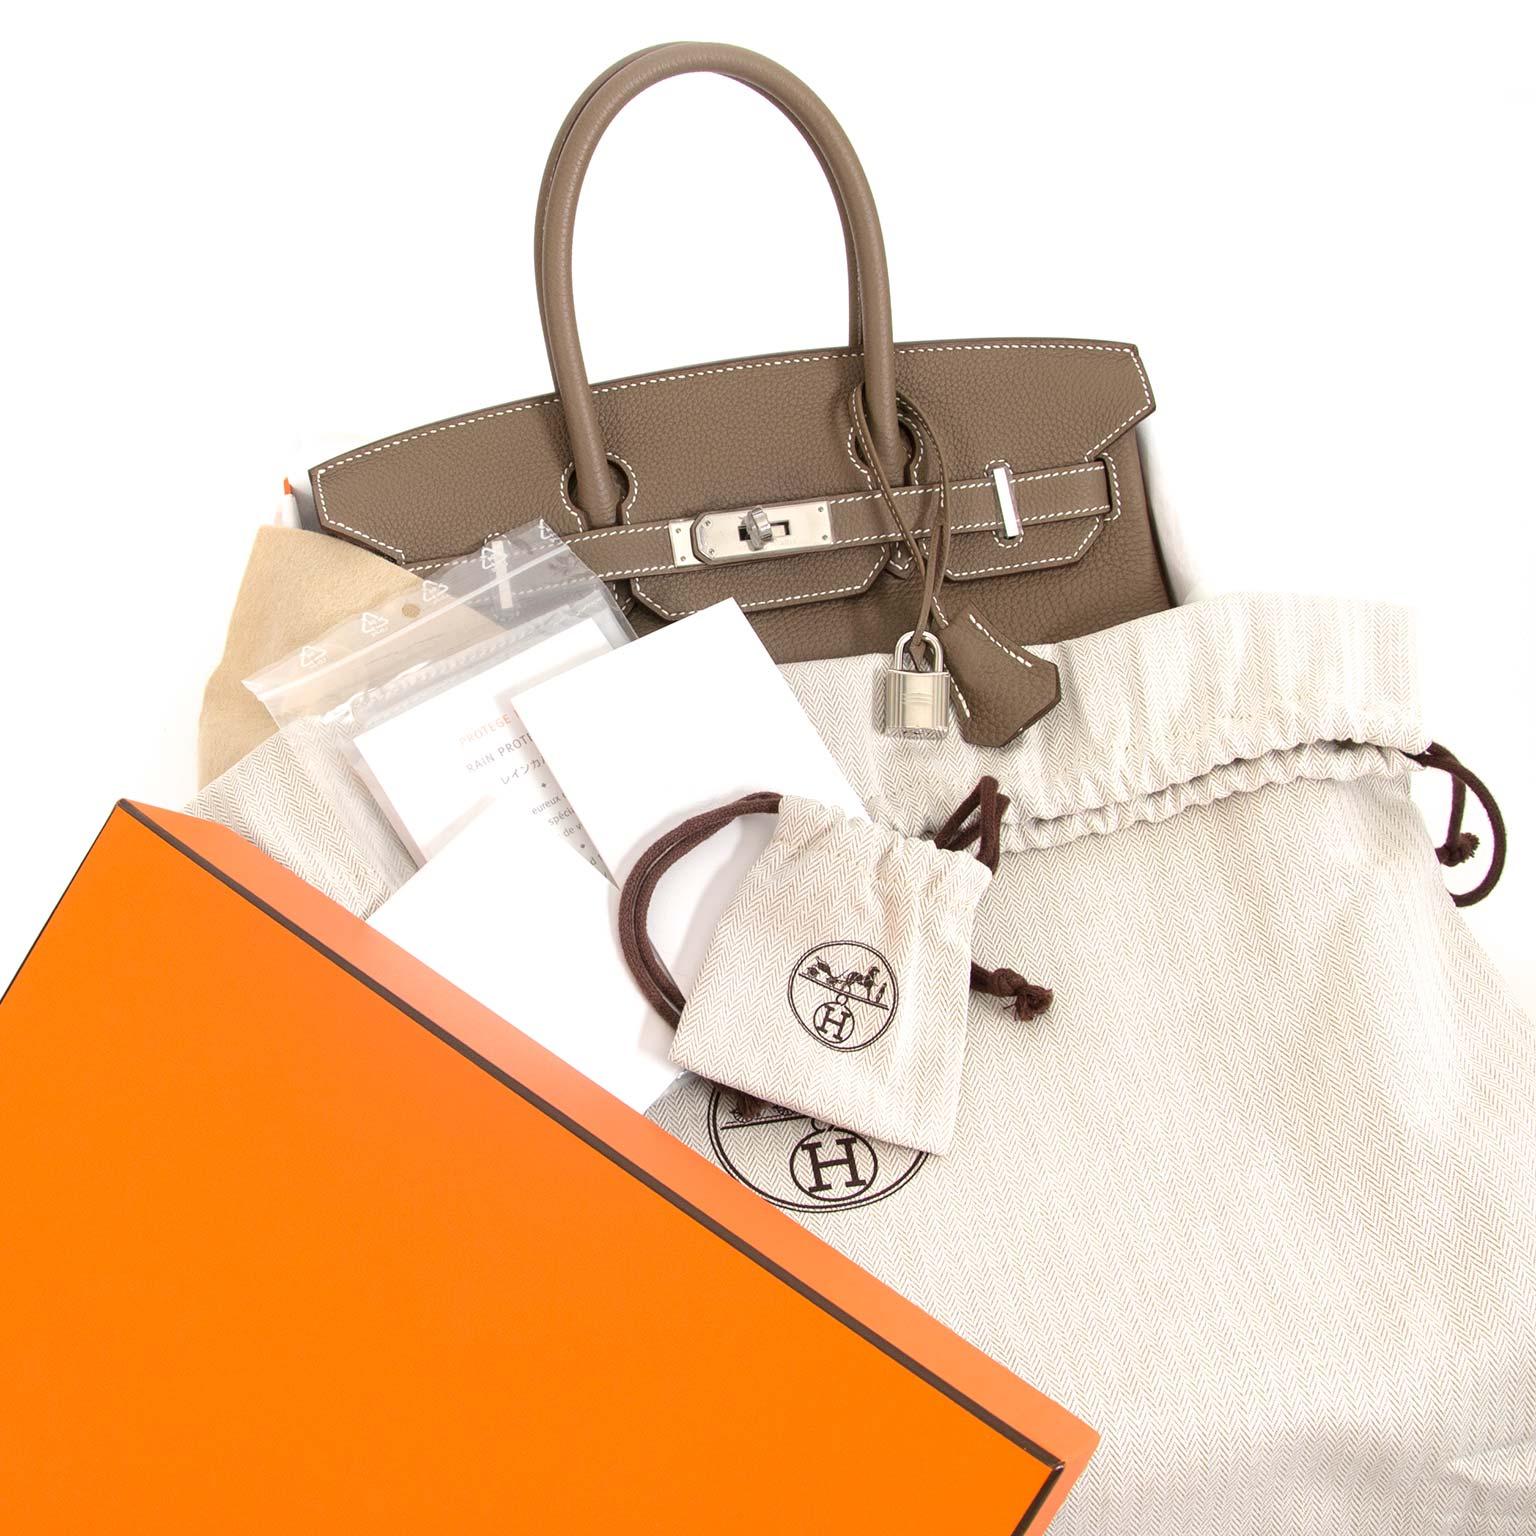 BRAND NEW Hermès Birkin 30 Etoupe Togo PHW
Skip the waiting list and get your hands on the most iconic bag of all time: the Hermès Birkin.
This Hermès Birkin in veau togo comes in a gorgeous neutral 'Etoupe' color and features striking palladium